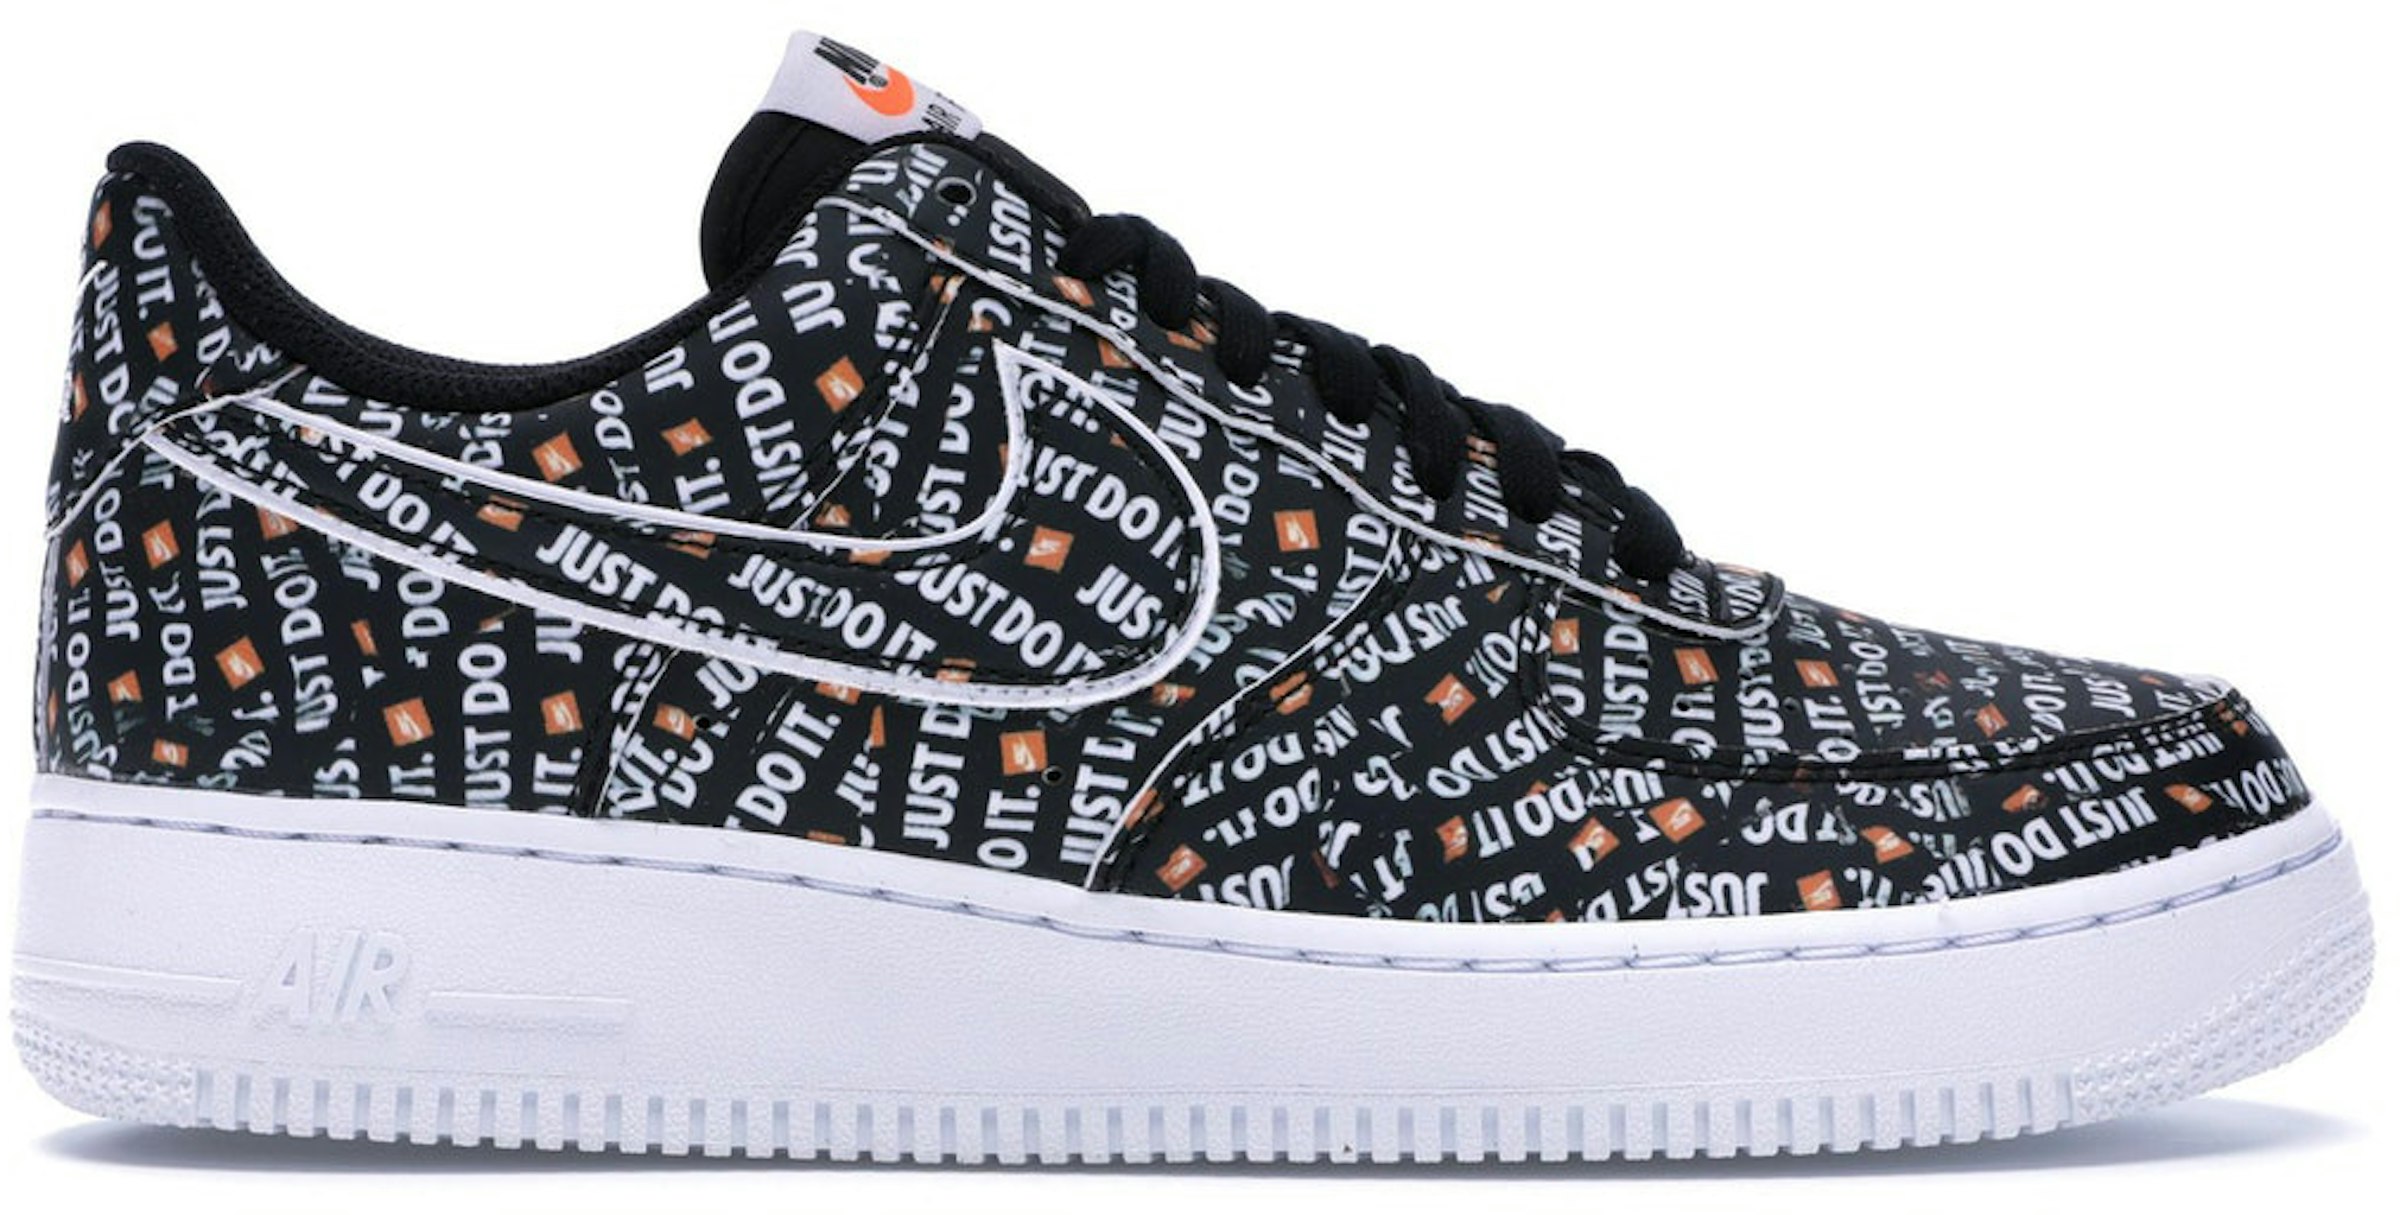 Nike Air Force 1 Low Just Do It Pack Black - AO6296-001 - MX